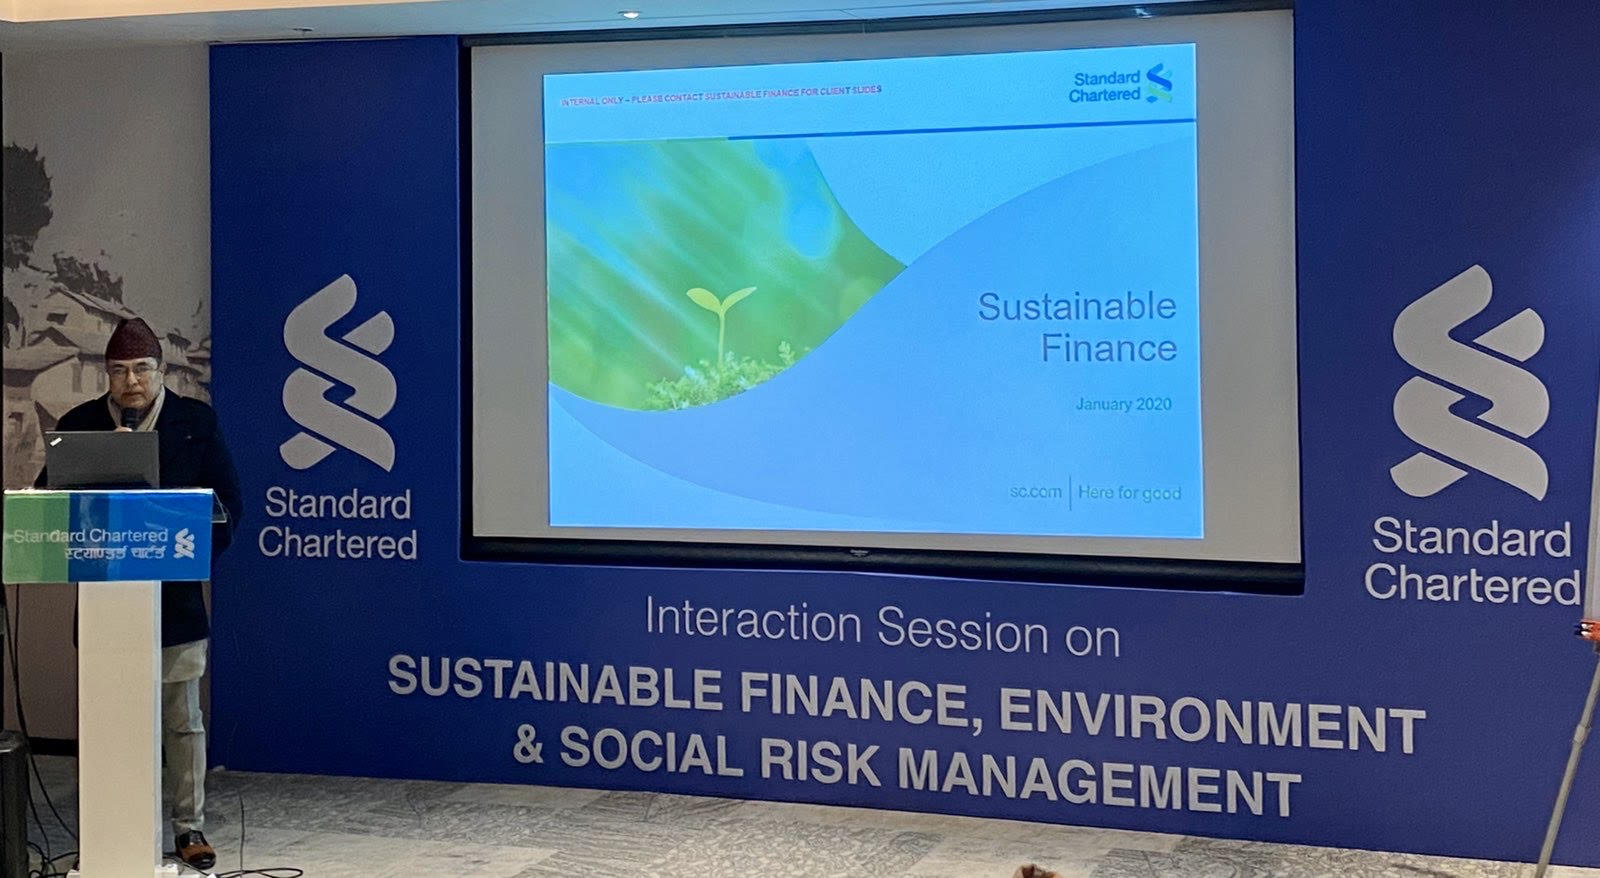 Interaction session on “Environment & Social Risk Management”